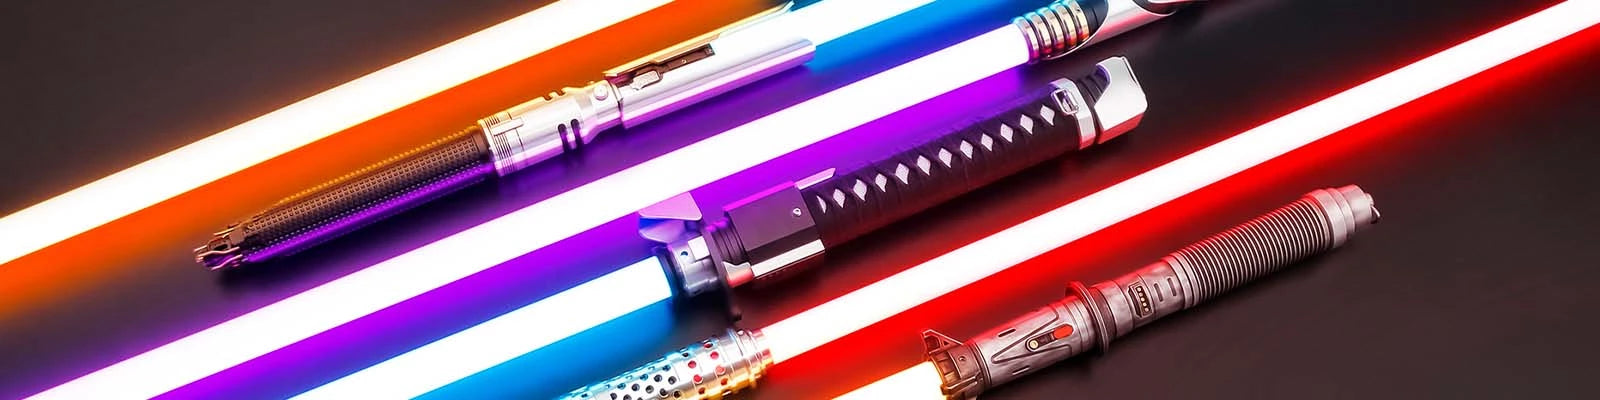 Best lightsaber with sound